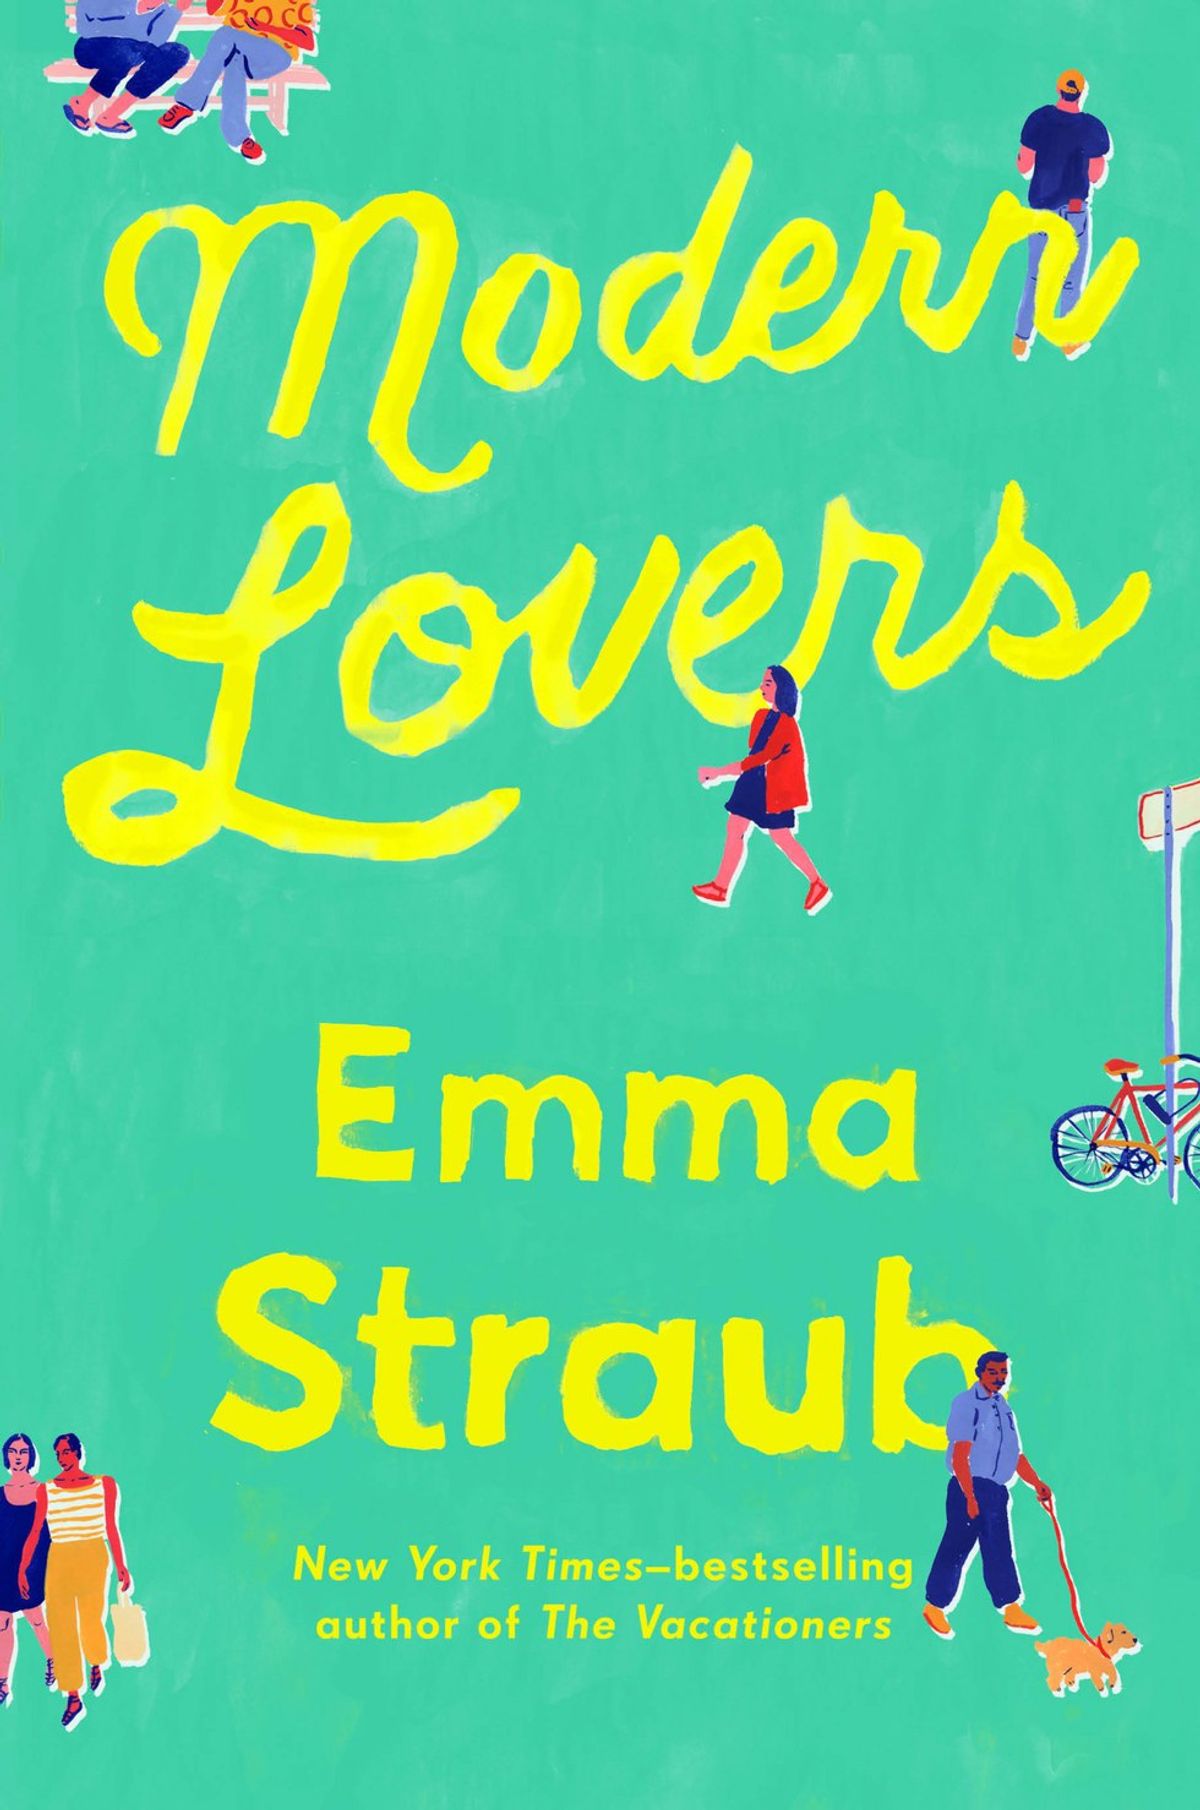 "Modern Lovers" Book Review